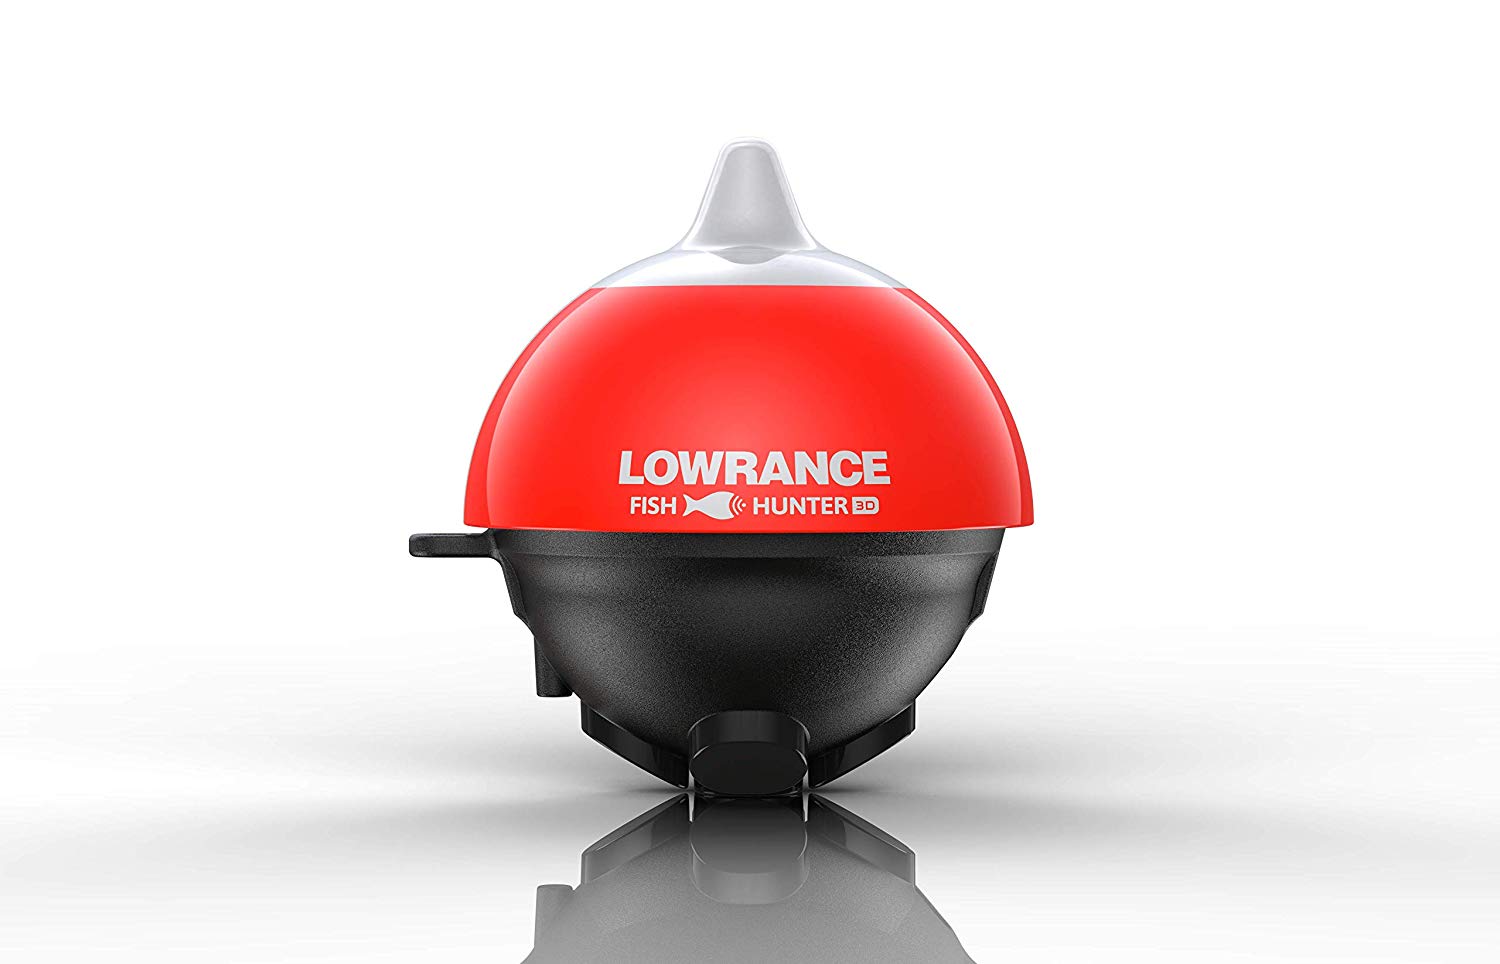 Lowrance FishHunter 3D - Portable Fishfinder Connects via WiFi to iOS and Android Devices - image 1 of 7